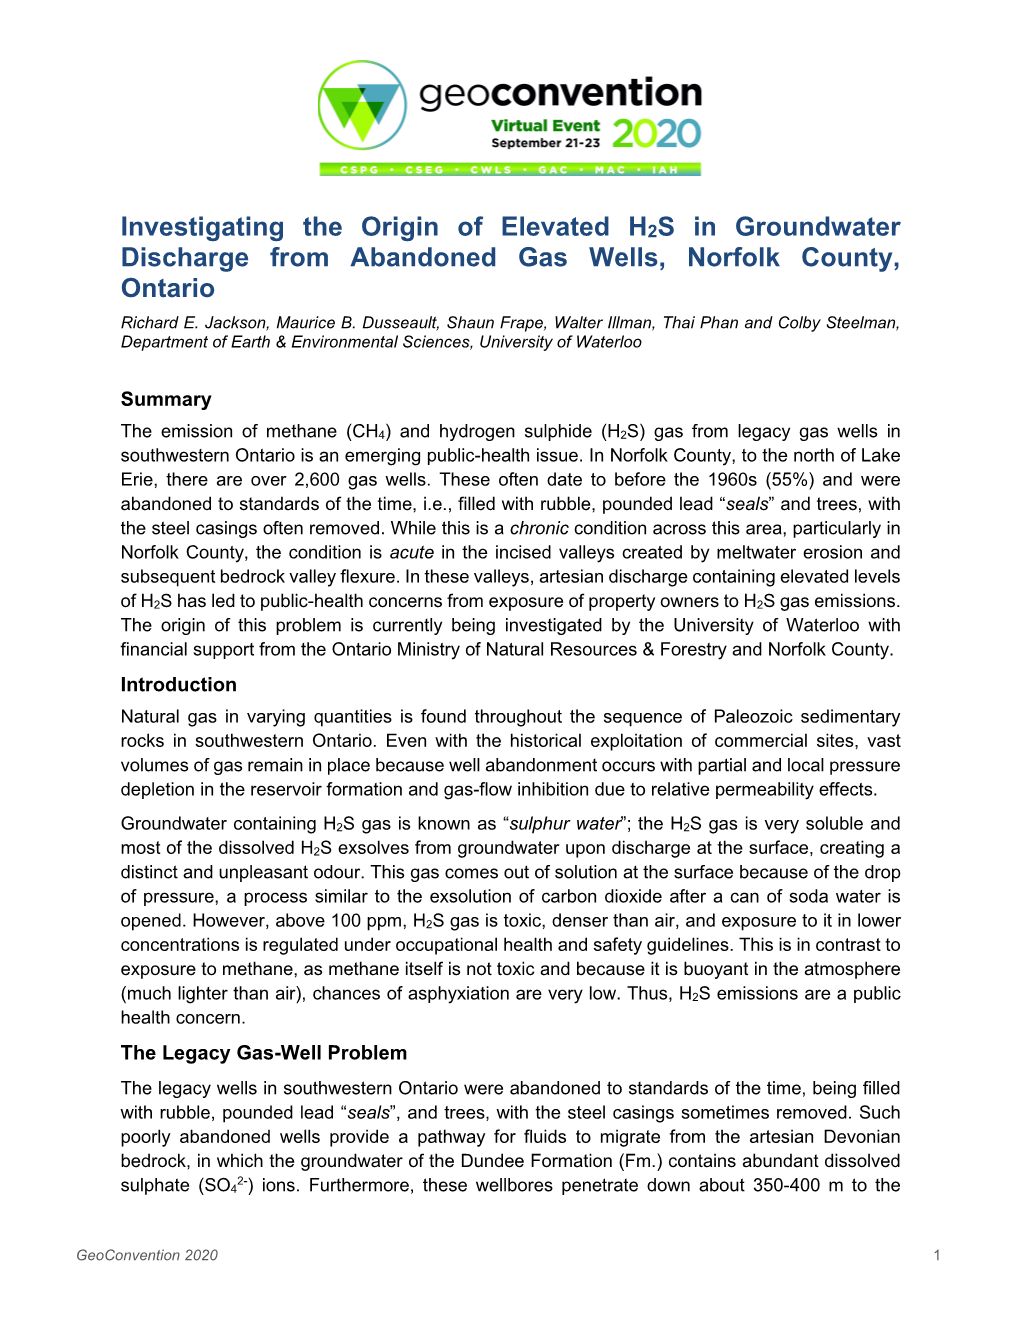 Investigating the Origin of Elevated H2S in Groundwater Discharge from Abandoned Gas Wells, Norfolk County, Ontario Richard E